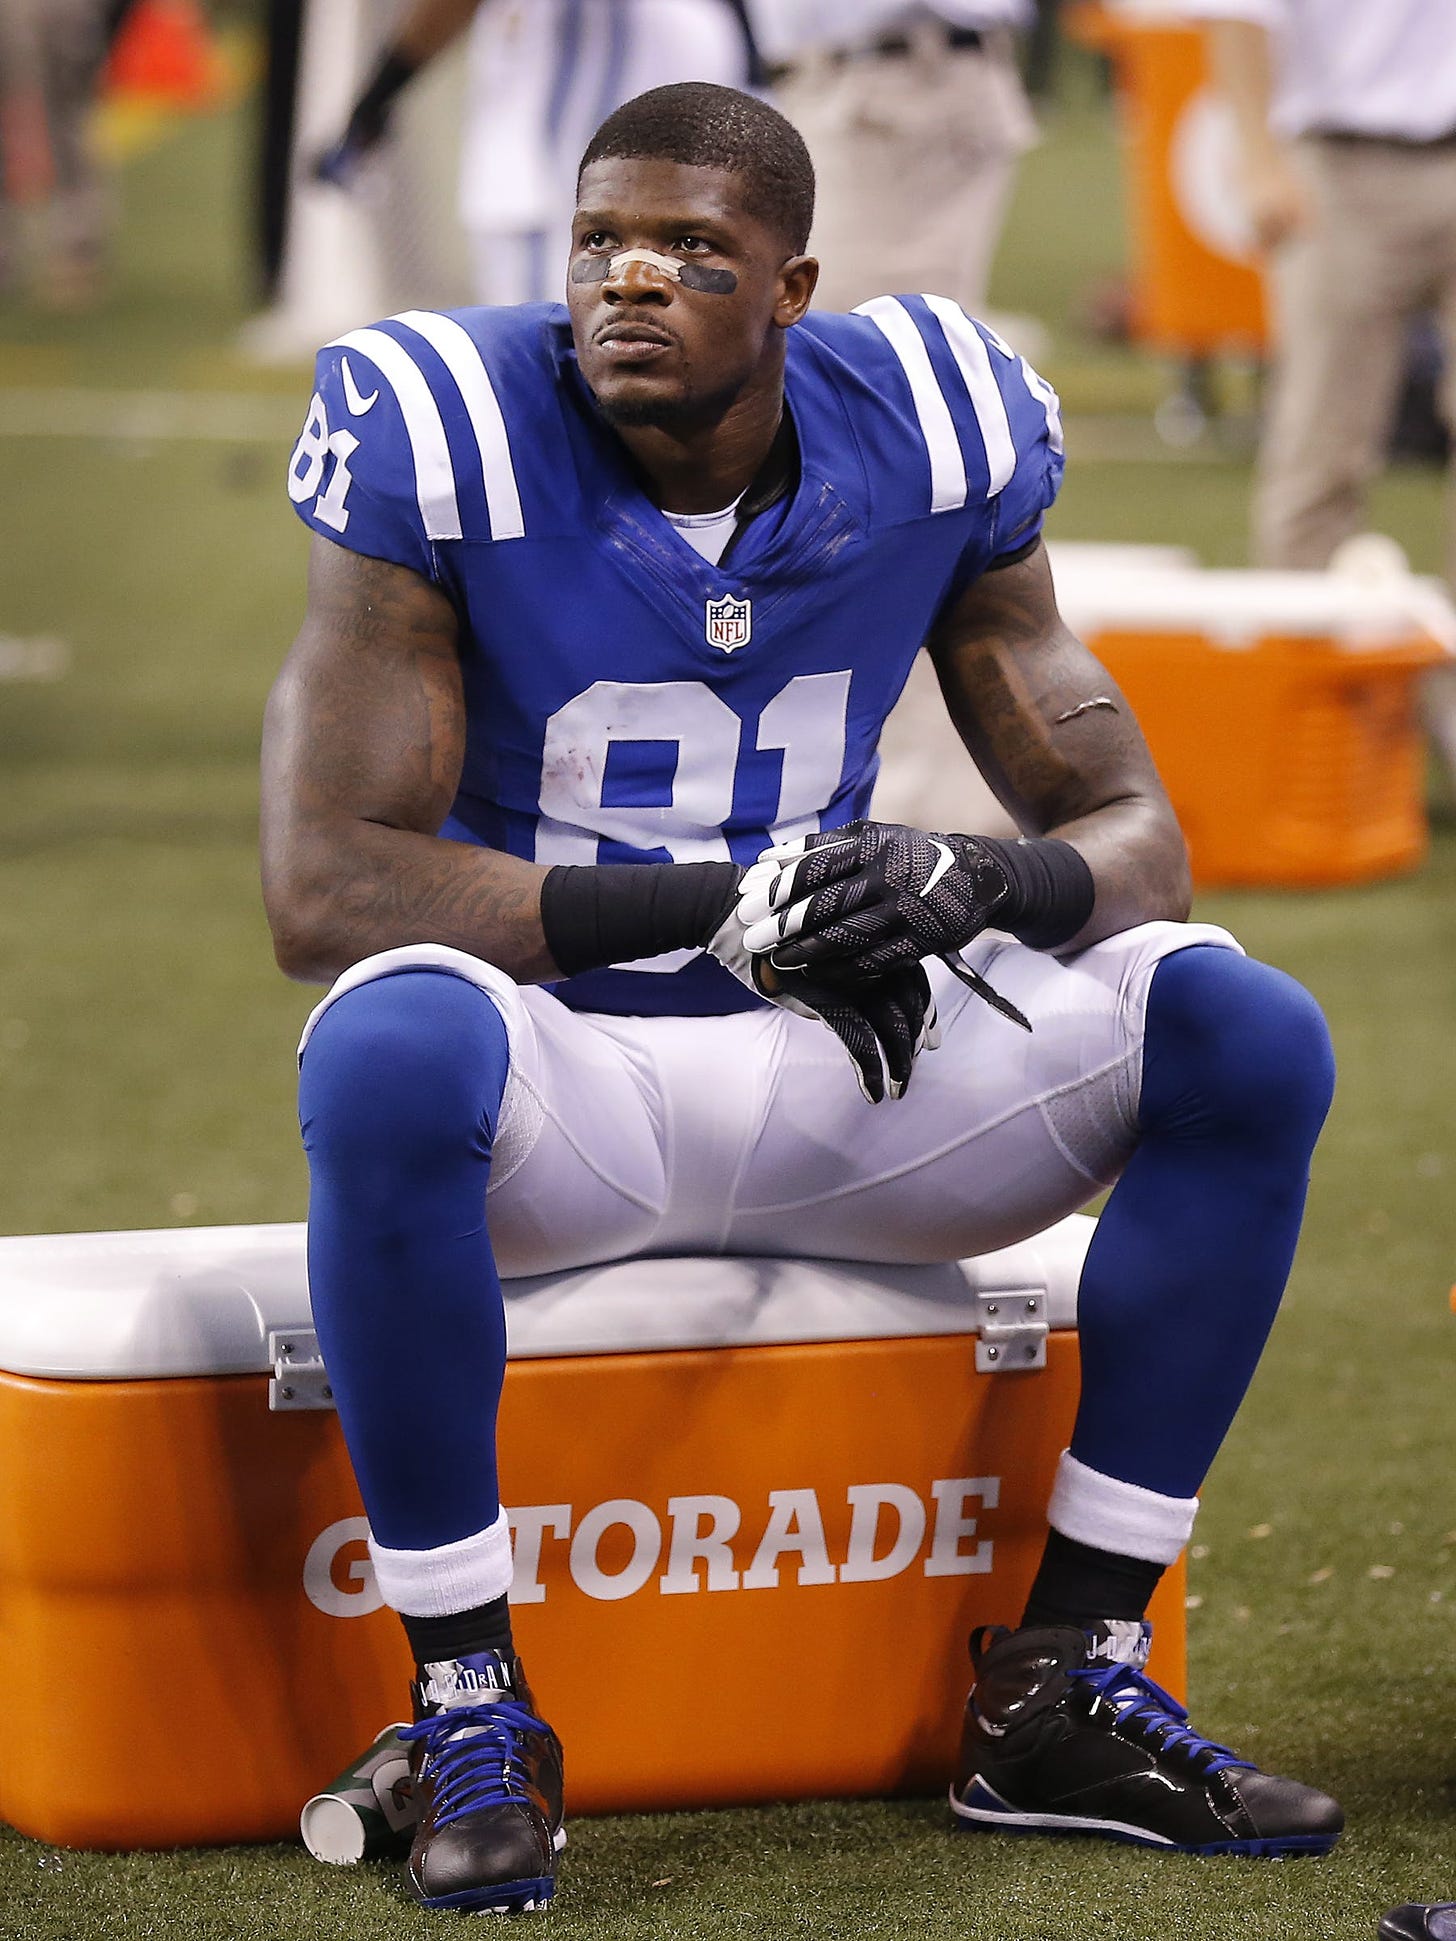 What has happened to Andre Johnson?